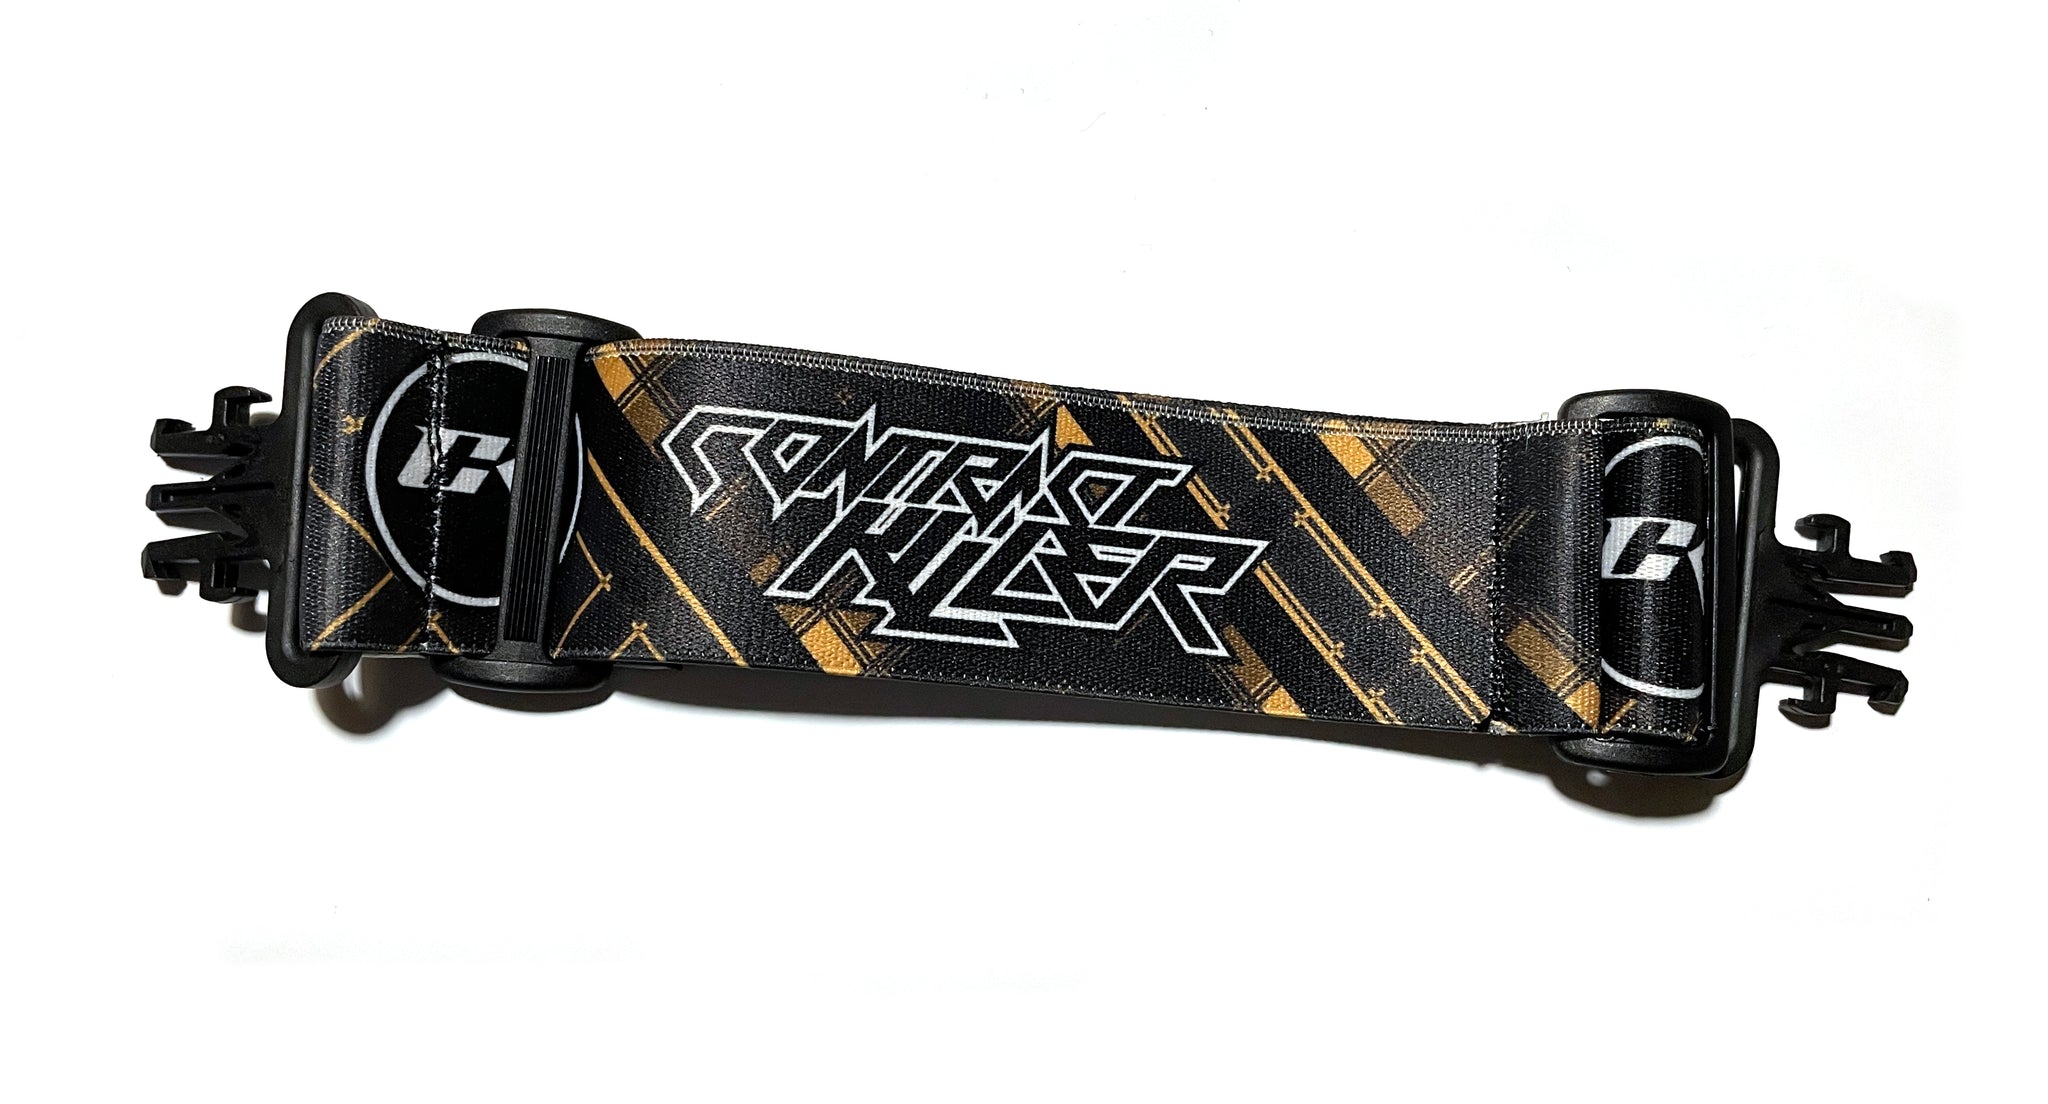 CK Paintball Goggle Strap 2020 strap Sometimes - JT Style